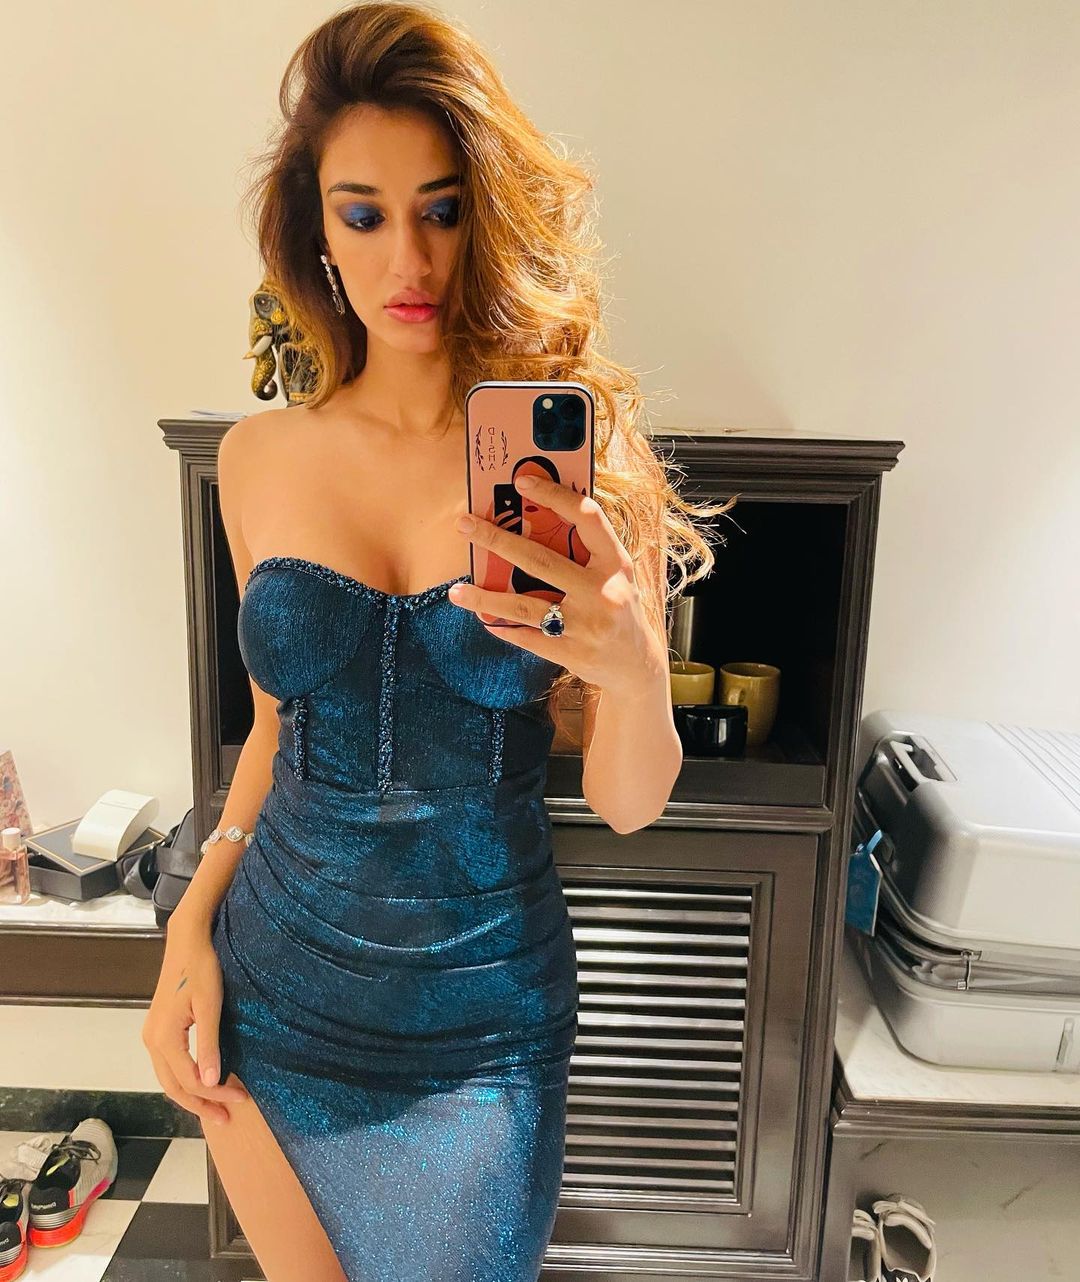 Disha Patani oozes sexiness in the off-shoulder blue metallic dress.